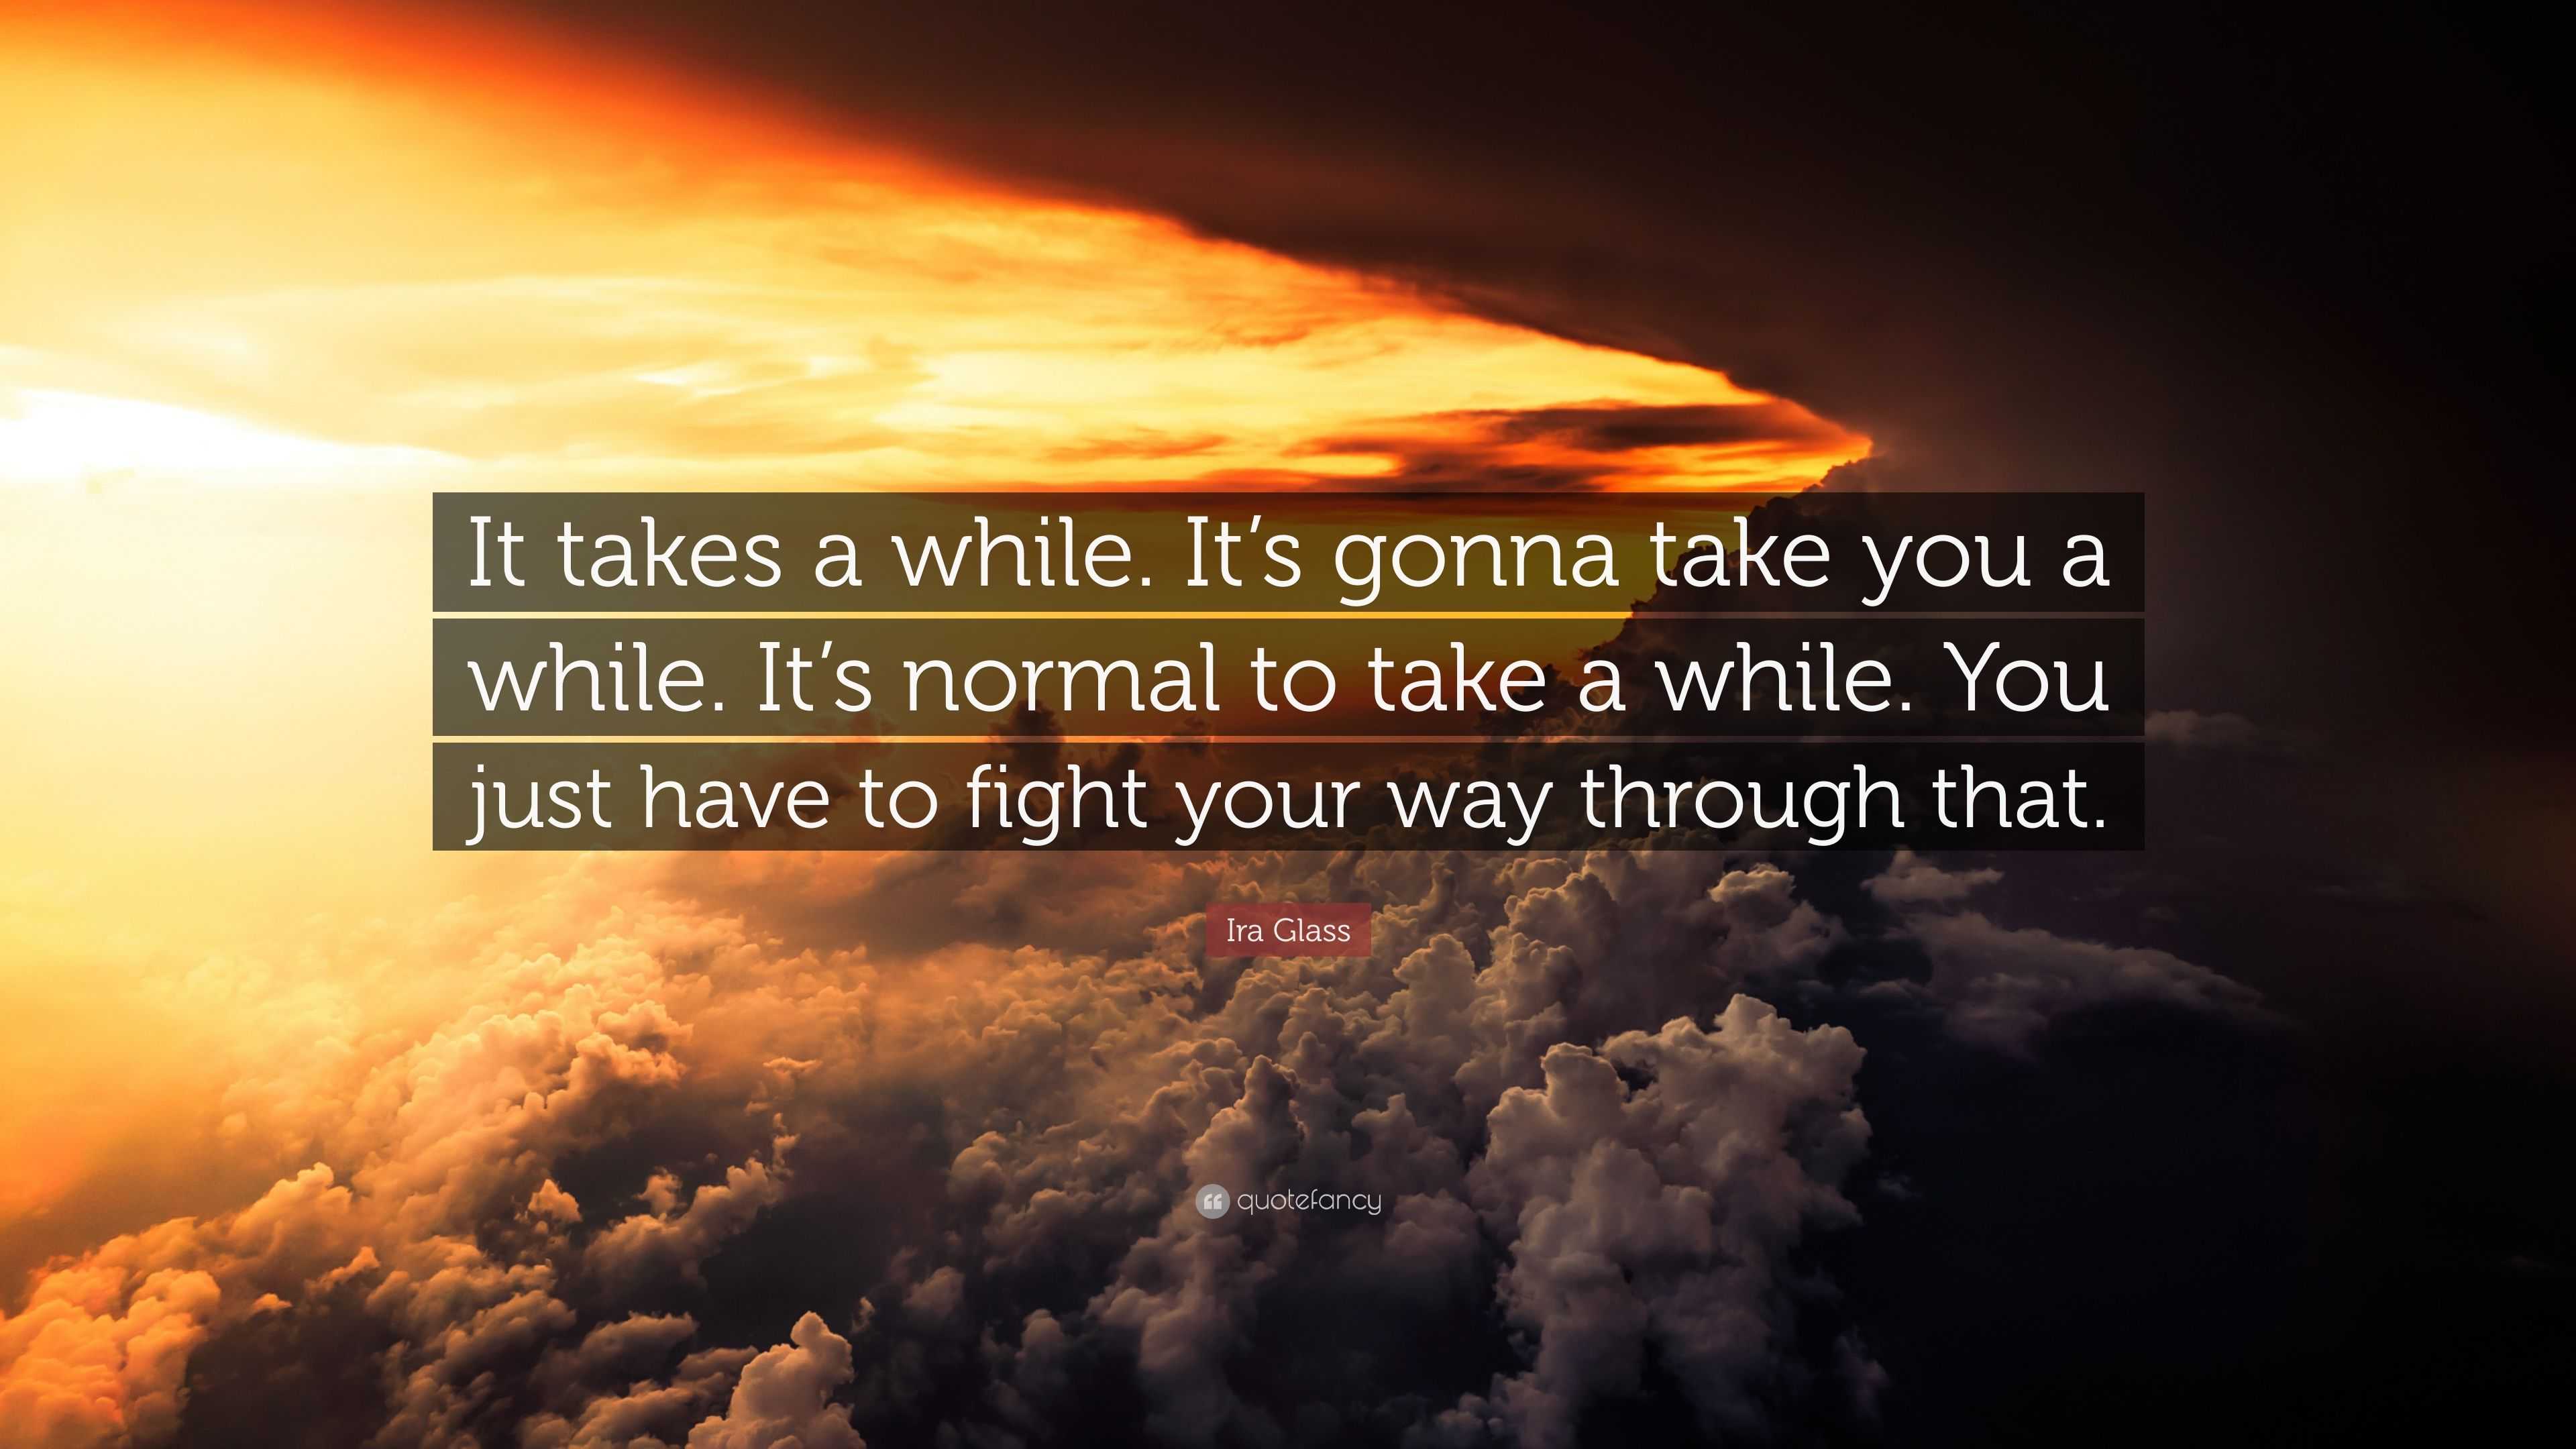 Ira Glass Quote: “It takes a while. It's gonna you a while. It's normal take a while. You just have to fight your way through that...”